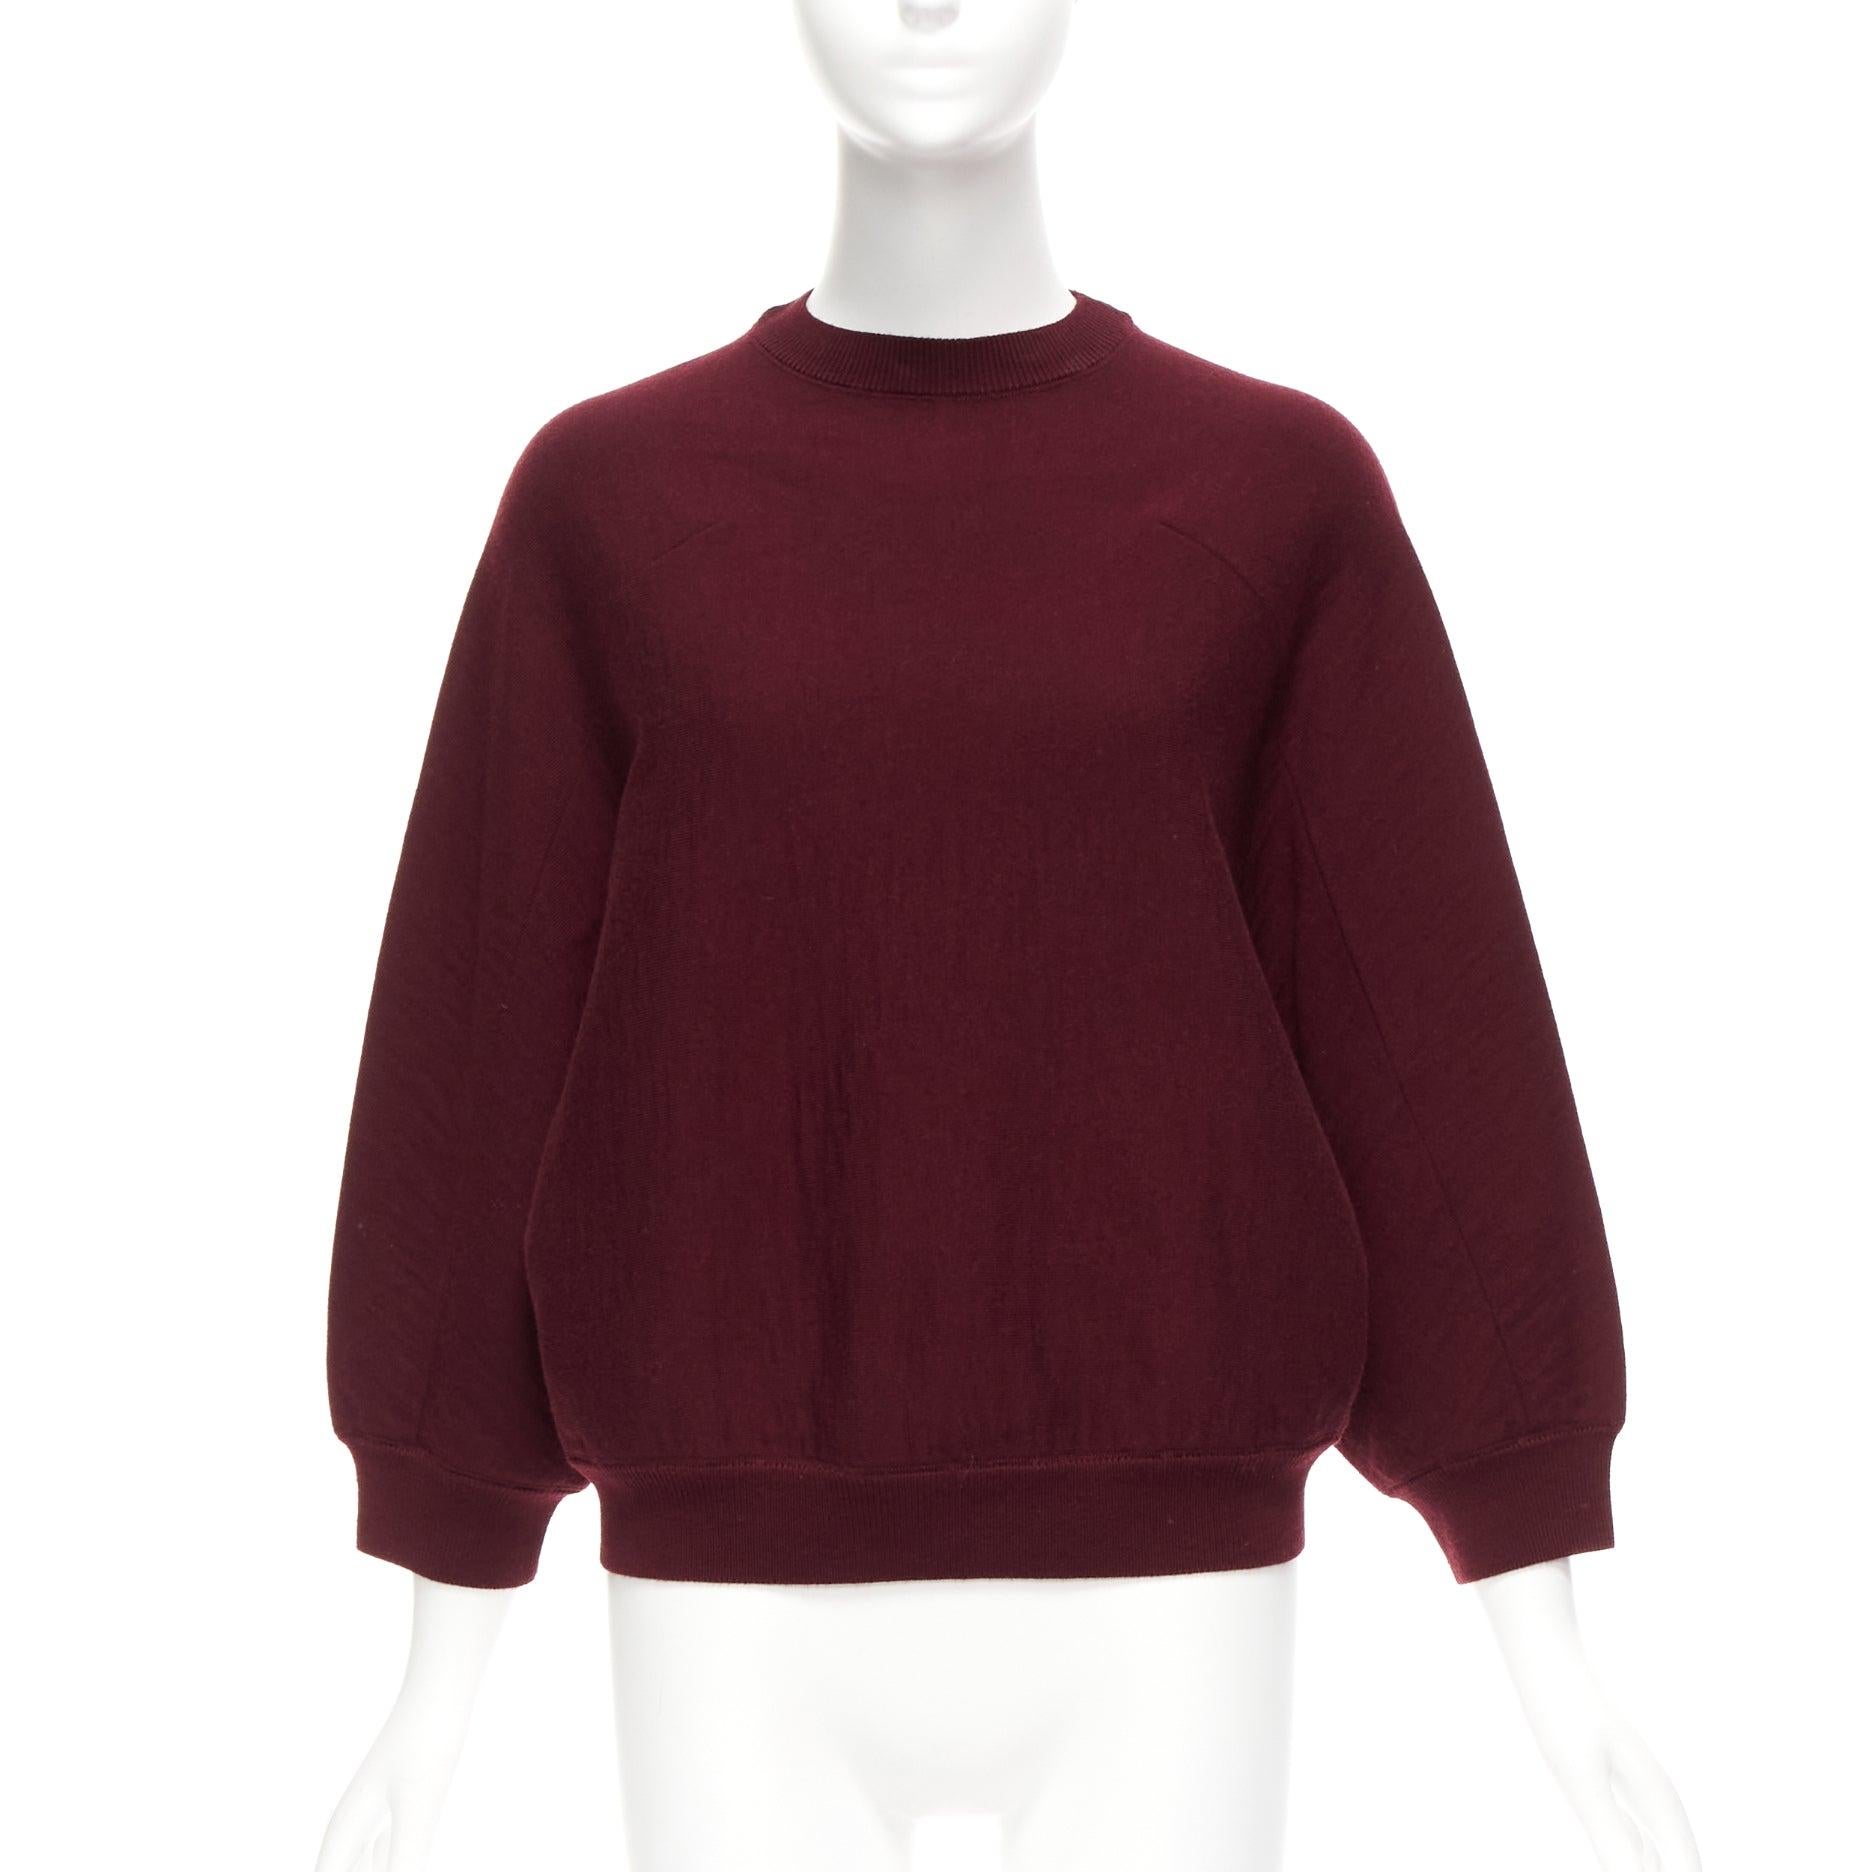 MARNI 100% wool burgundy crop back batwing boxy sweater IT38 S
Reference: CELG/A00342
Brand: Marni
Material: Virgin Wool
Color: Burgundy
Pattern: Solid
Closure: Slip On
Extra Details: Cropped at backside.
Made in: Spain

CONDITION:
Condition: